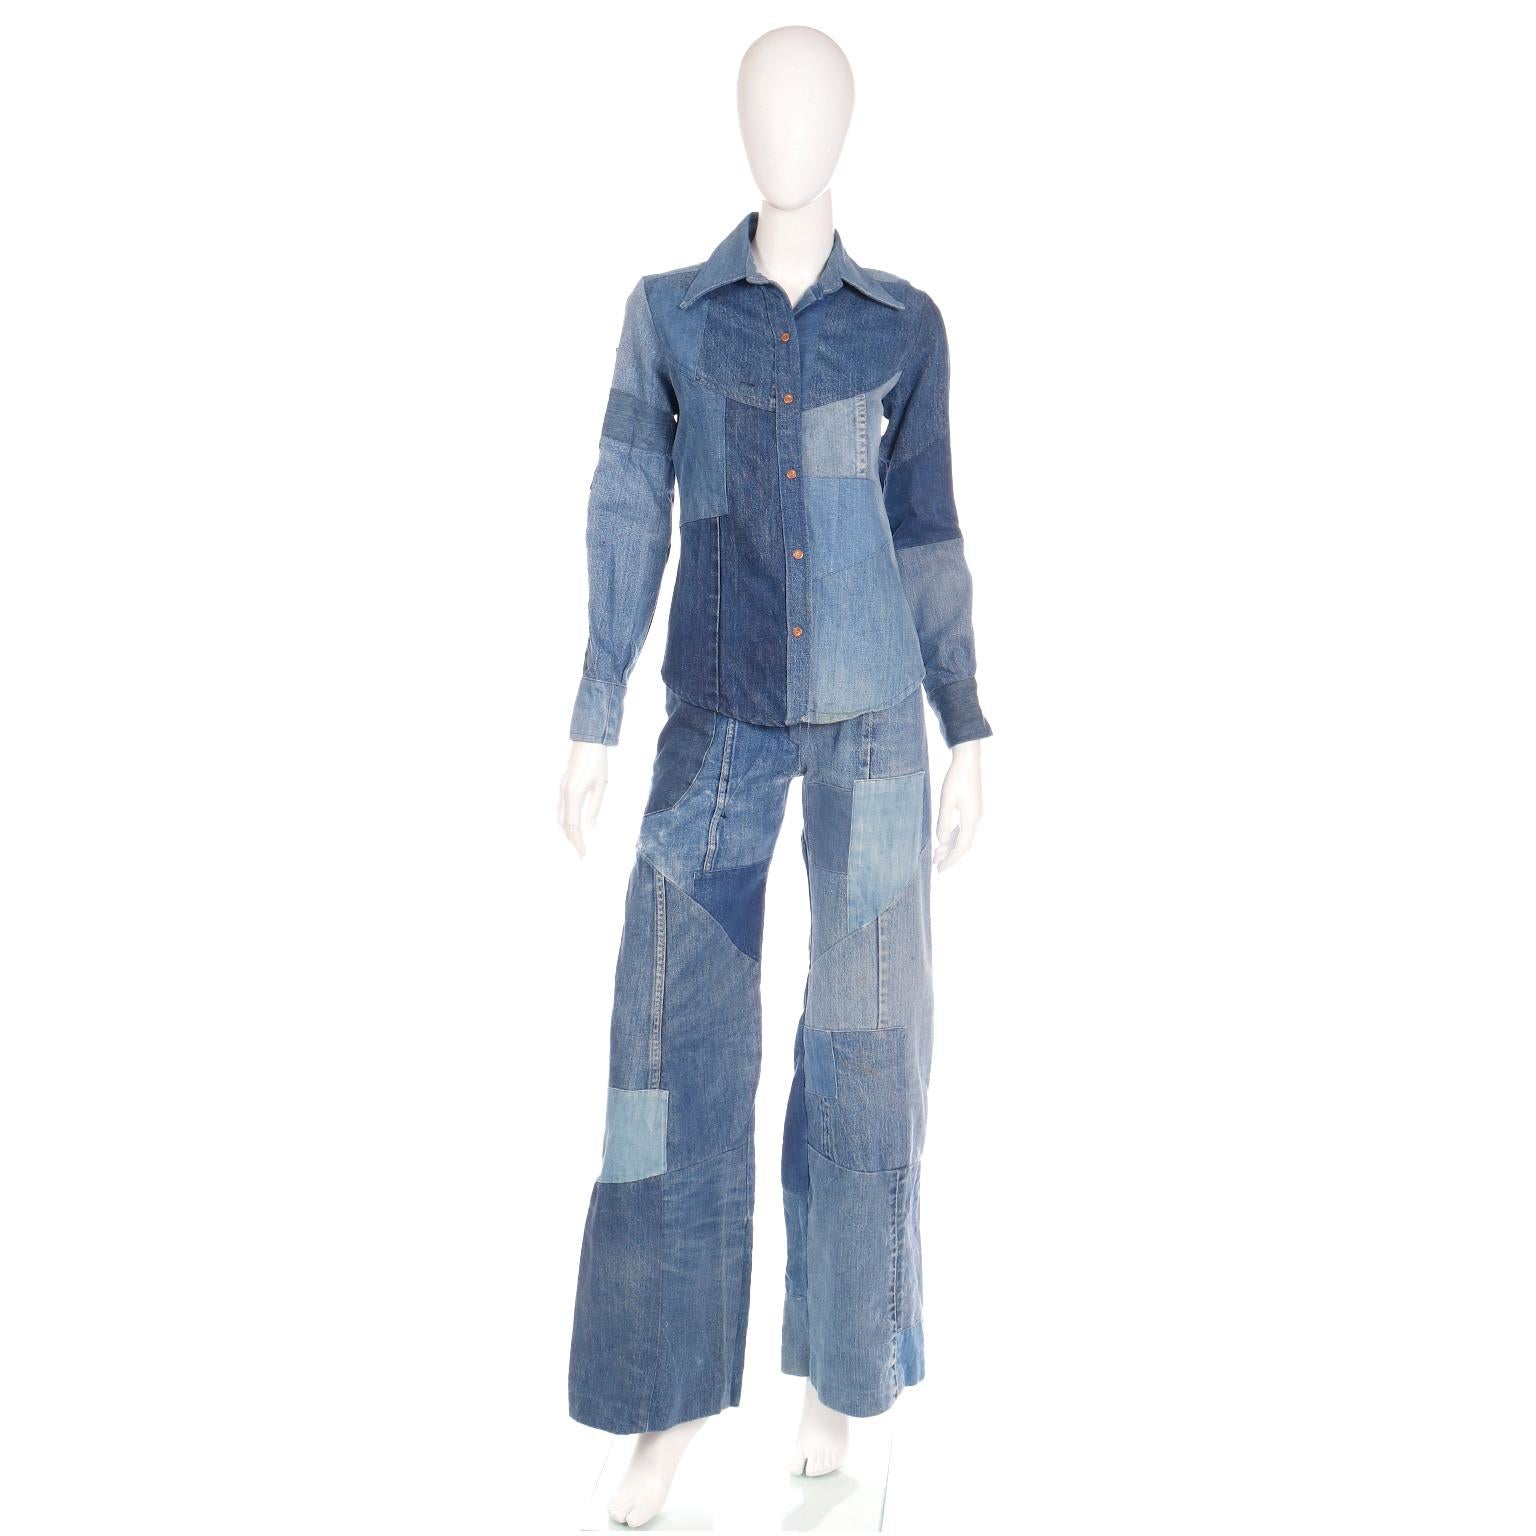 This vintage 1970's patchwork denim jeans and long sleeve snap front shirt outfit is from Simi's Woodland Hills, North Hollywood, Oregon.	Lovingly worn, this ensemble is the epitome of the 70's and came from an estate of incredible vintage clothing